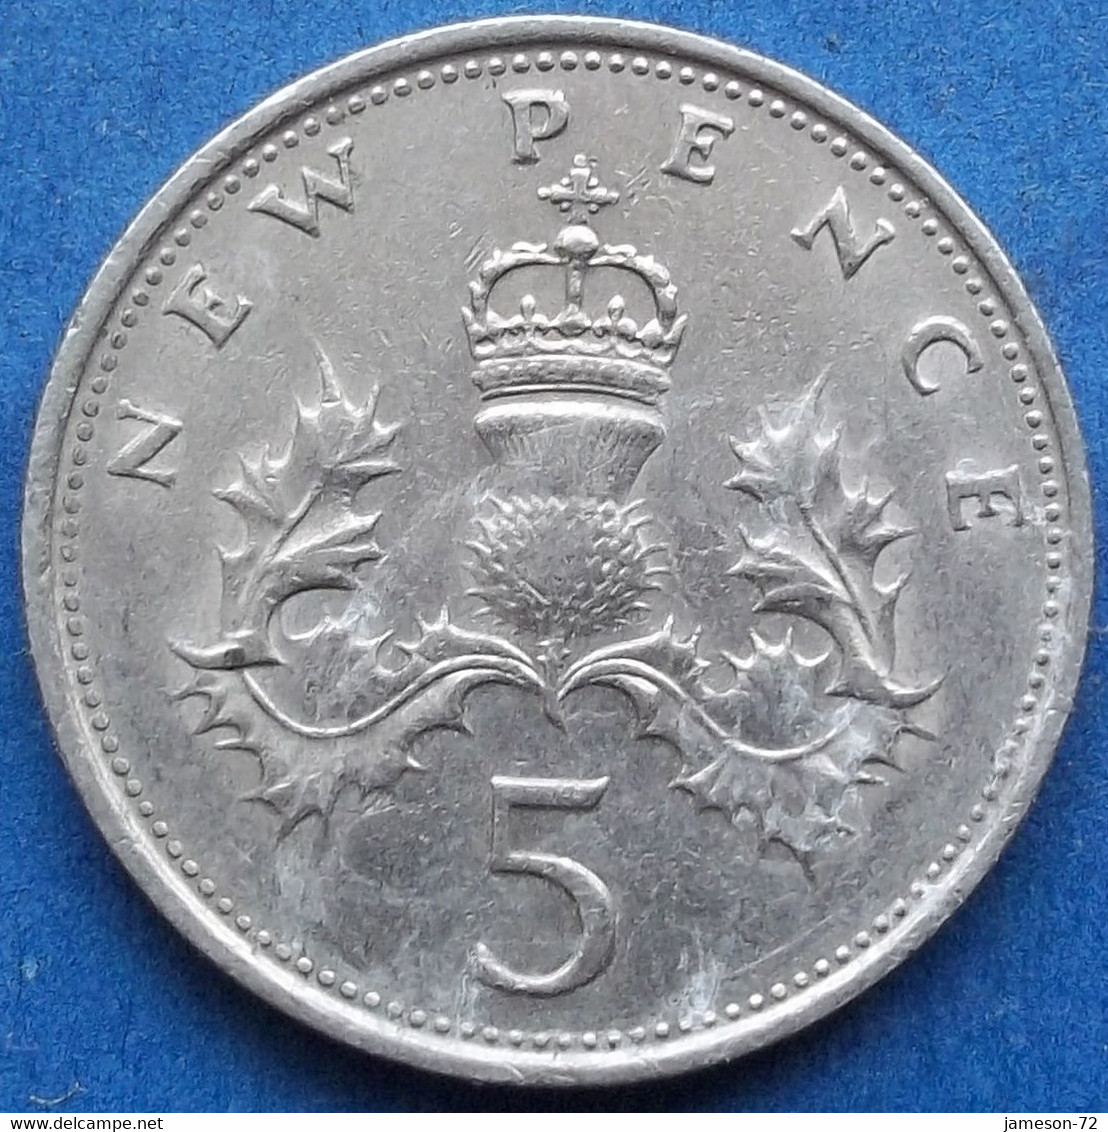 UK - 5 New Pence 1970 "Crowned Thistle" KM# 911 Elizabeth II Decimal Coinage (1971-2022) - Edelweiss Coins - 5 Pence & 5 New Pence